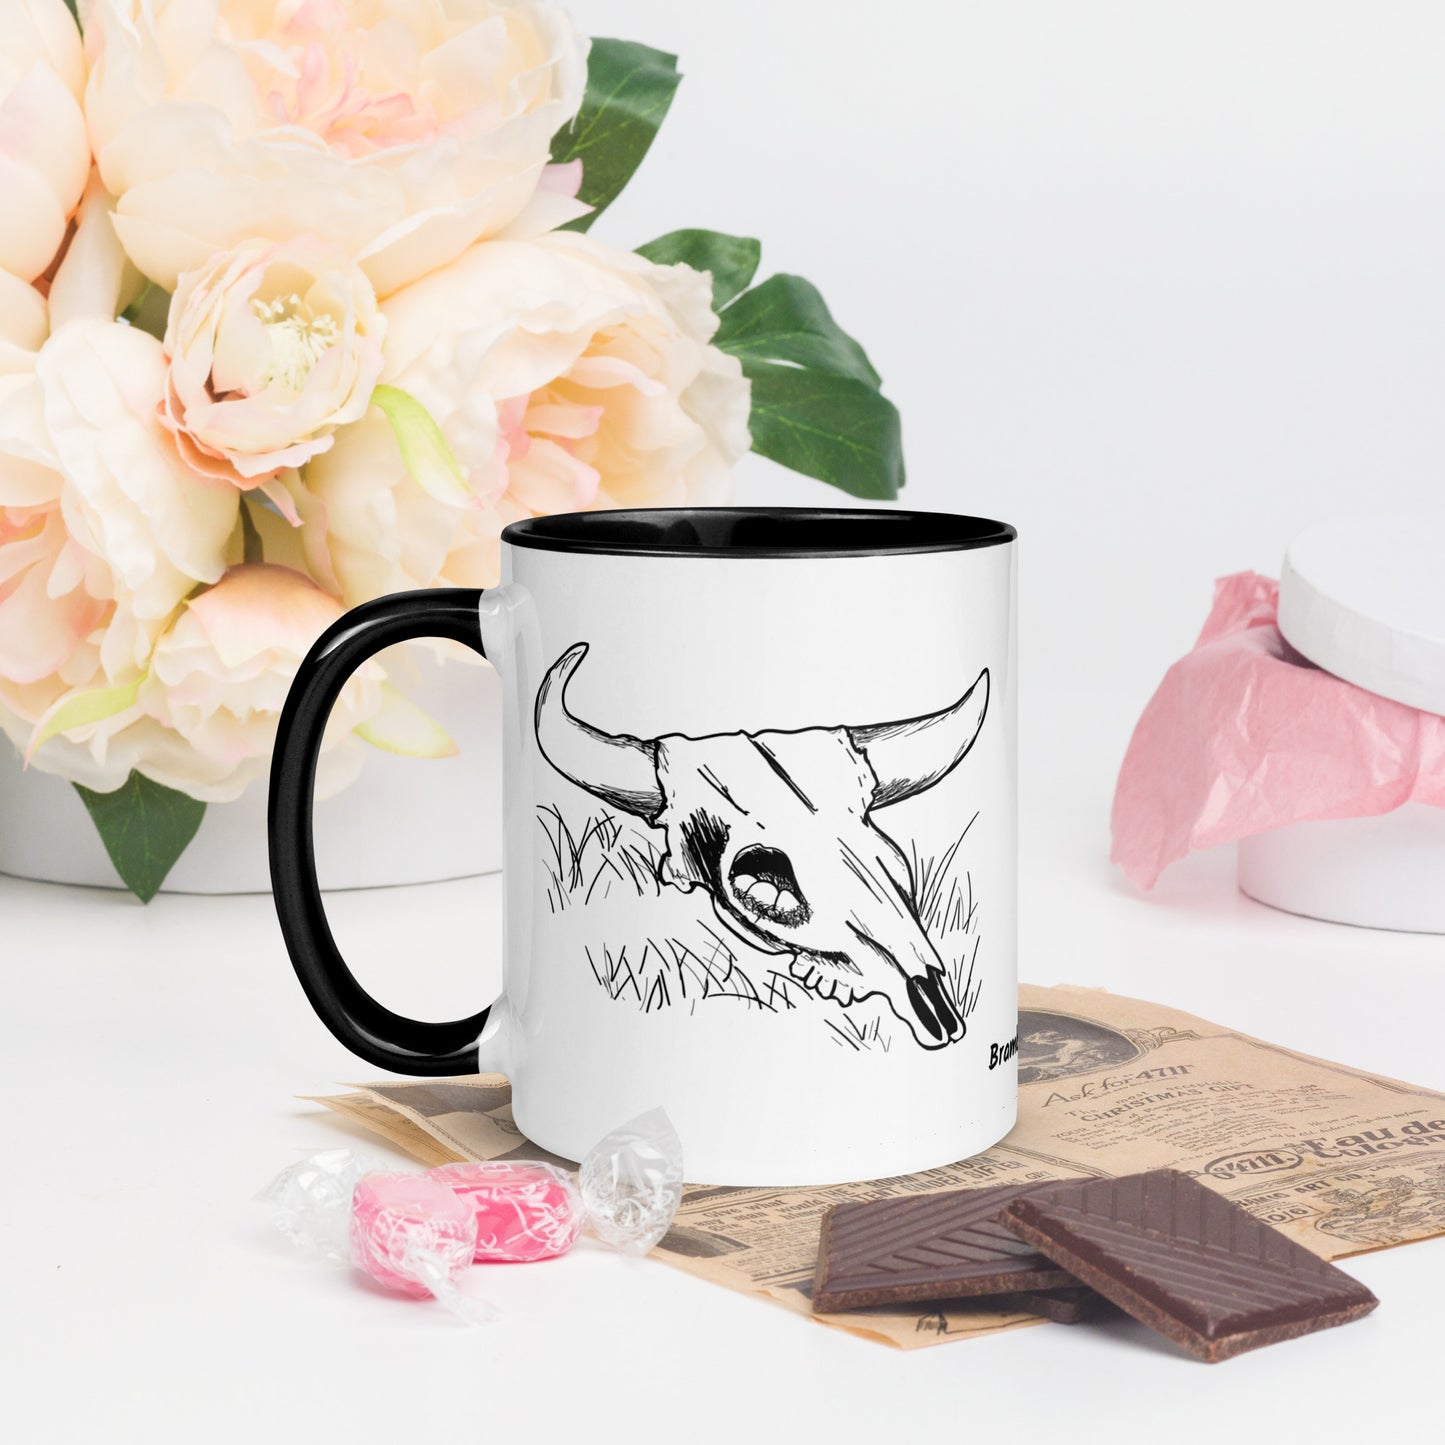 11 ounce ceramic mug. White with black handle and inside. Features double sided image of a cow skull cradling a bird nest. Shown by flowers and chocolates.